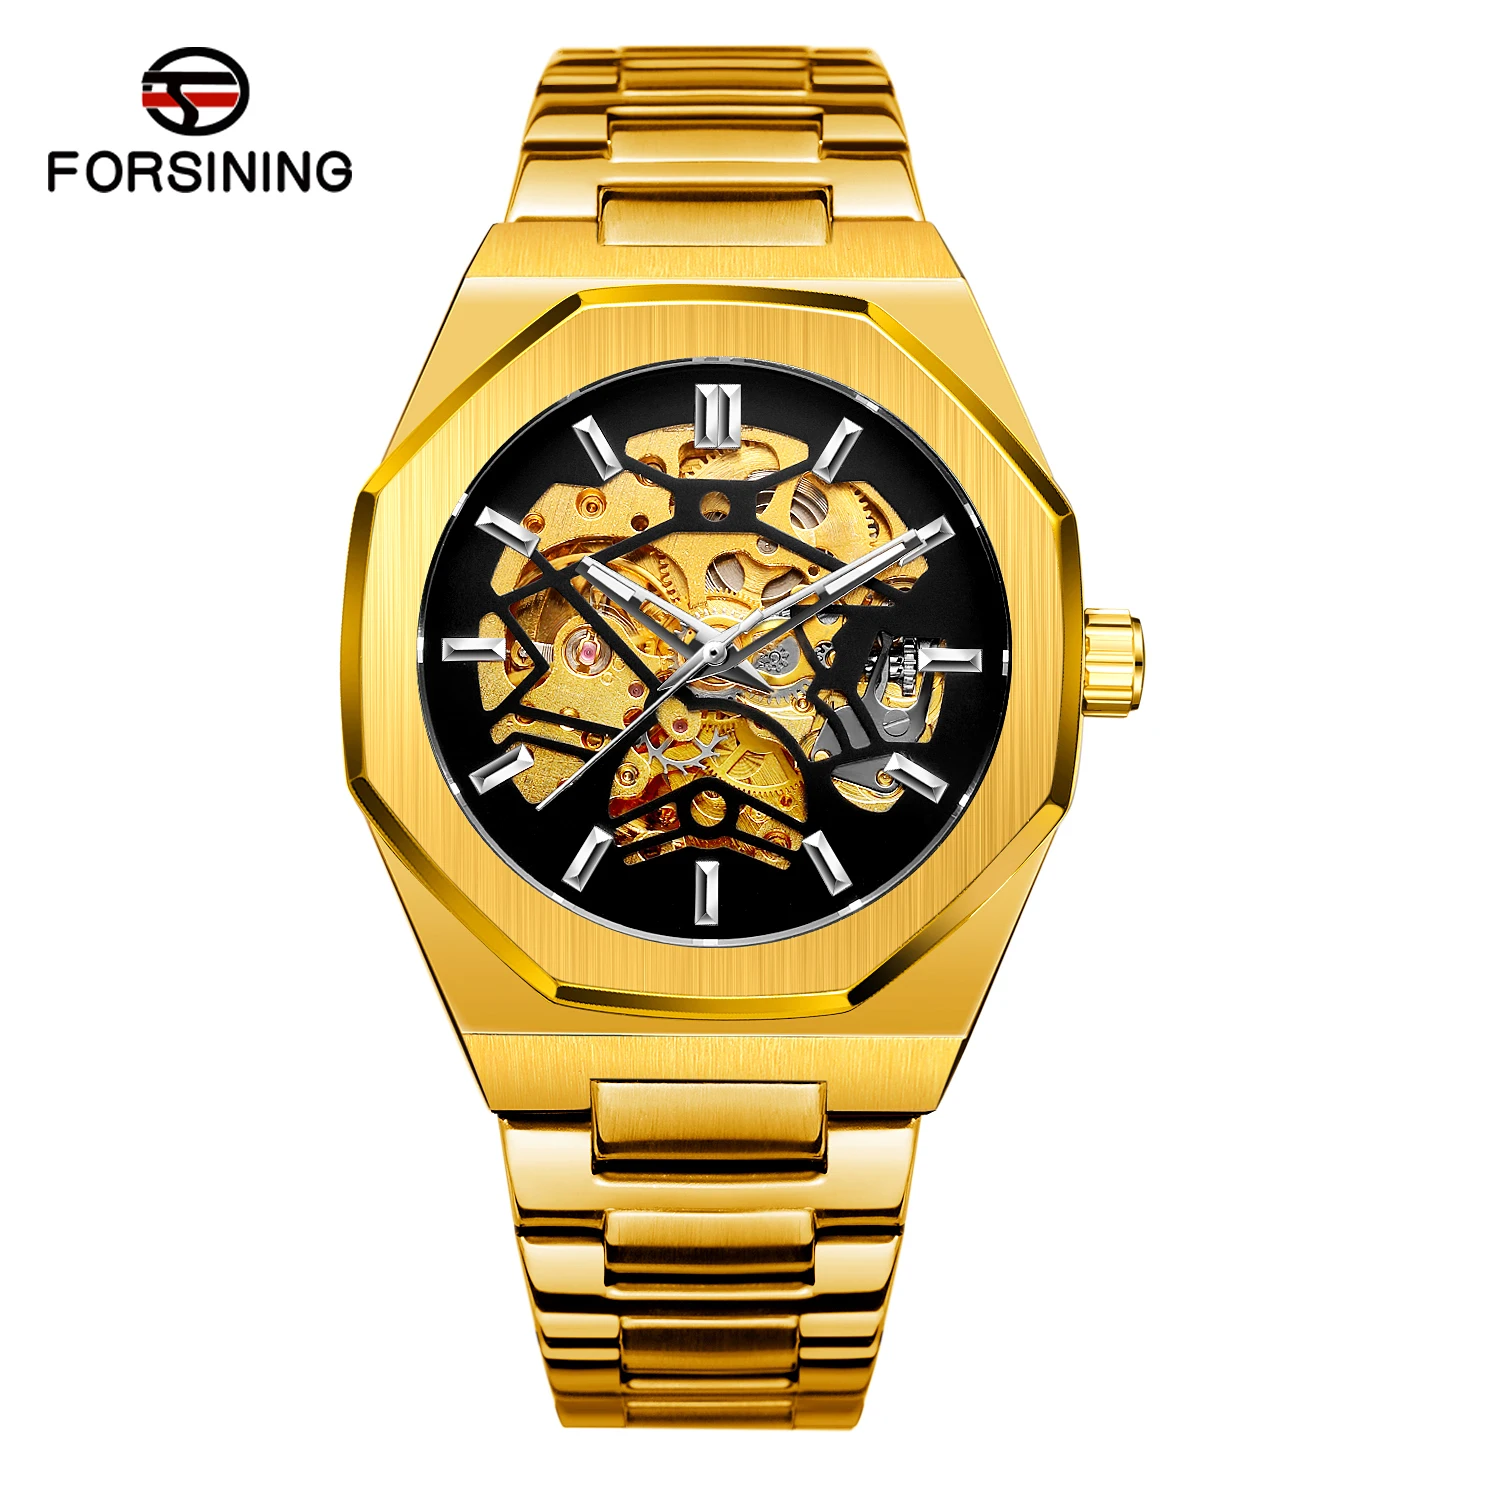 

2021 FORSINING Luxury Hot Selling Automatic Popular Skeleton relojes hombre Custom OEM Mens Watches montre homme New Arrival, 5 colors